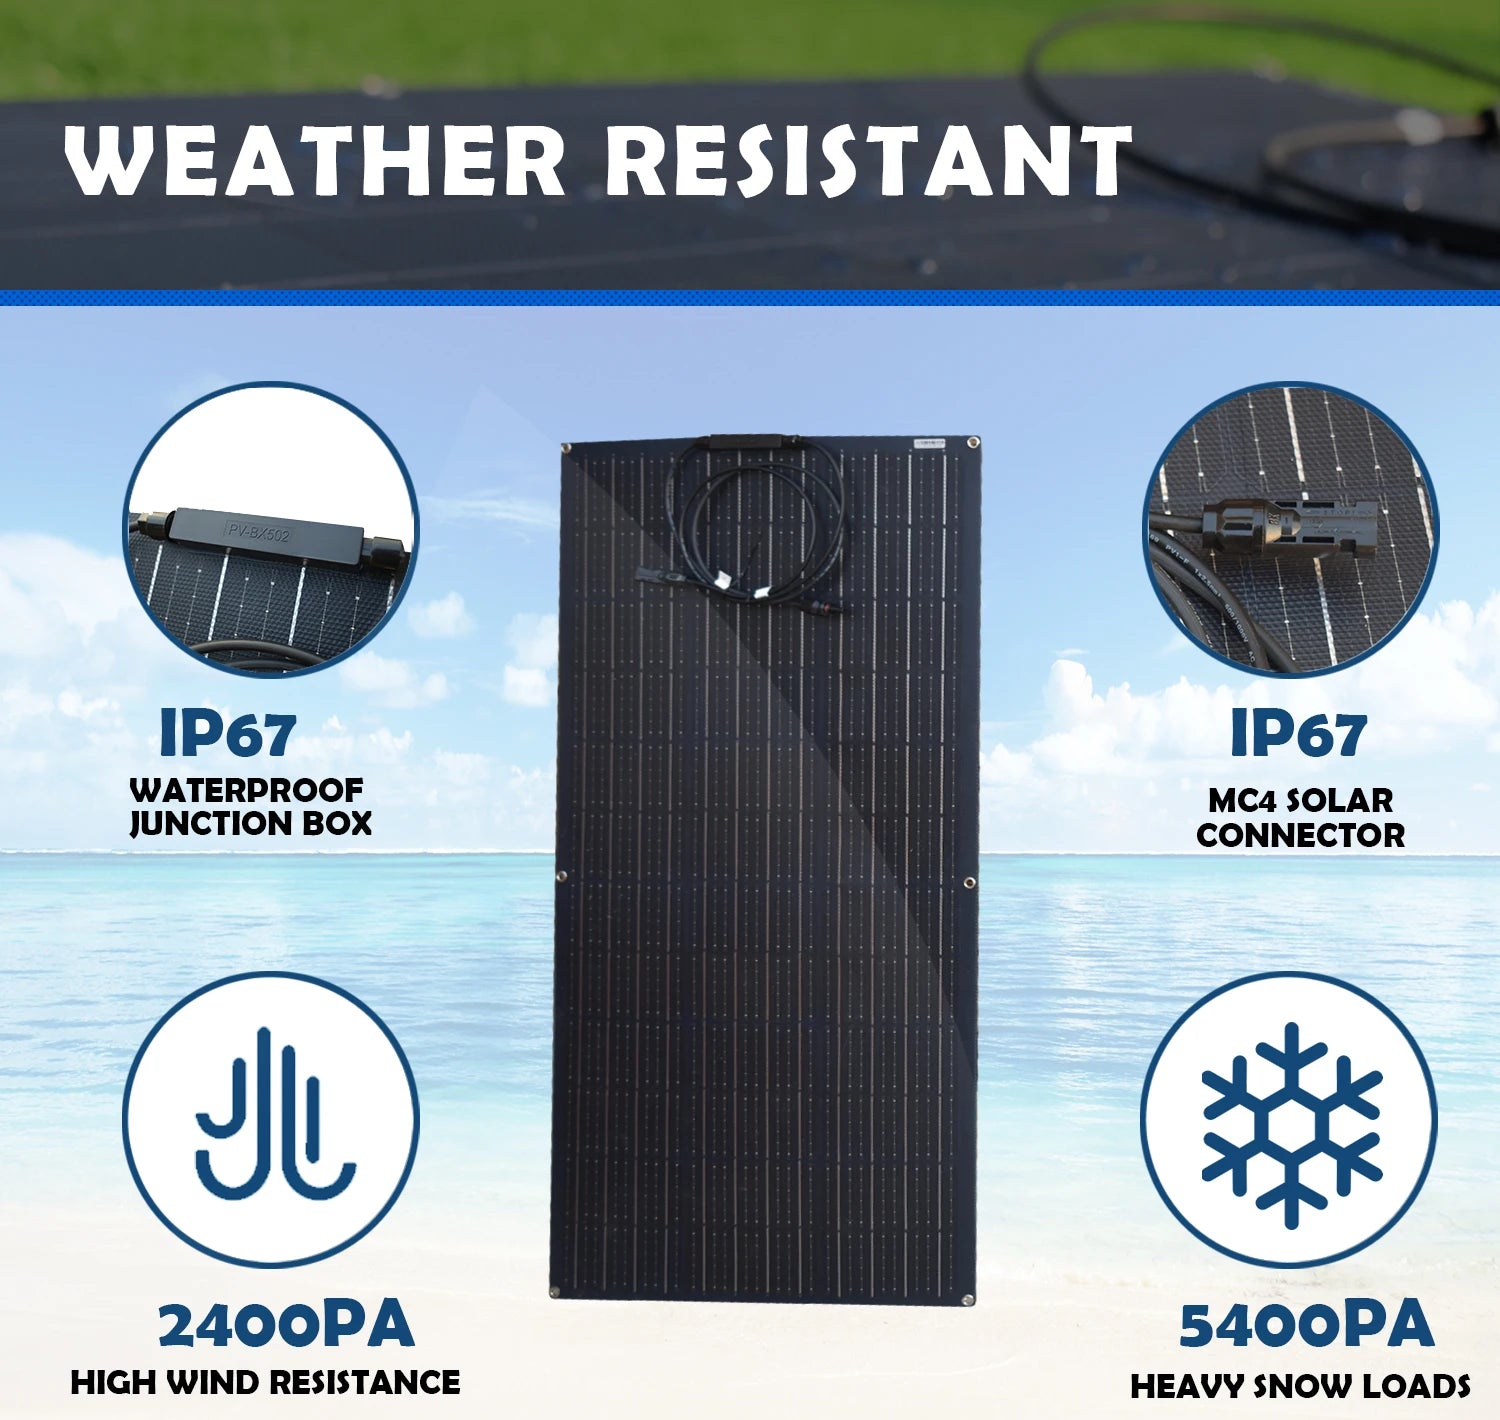 Robust solar panel for outdoor use in extreme conditions: waterproof, weather-resistant, and withstanding high winds and heavy snow.